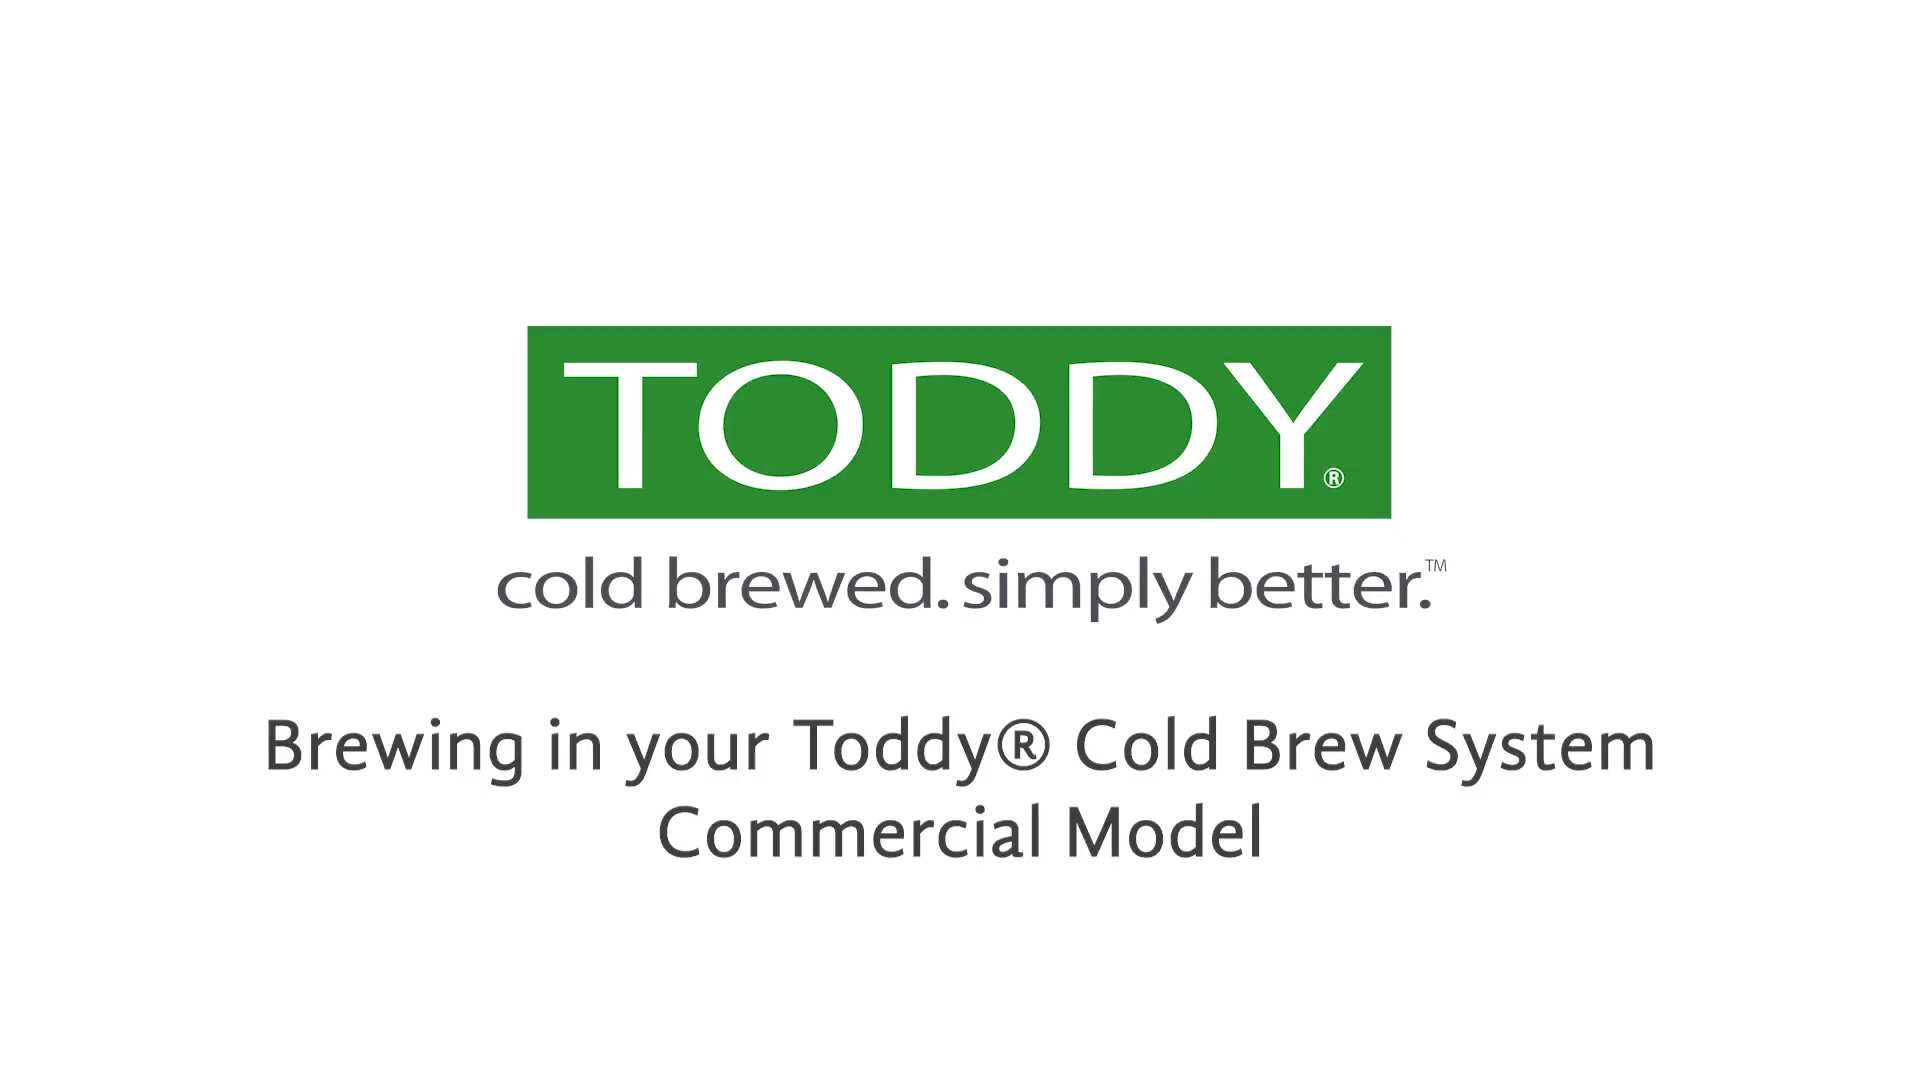 https://cdn.webstaurantstore.com/images/videos/extra_large/brewing_in_your_toddy_cold_brew_system_commercial_model.00_00_01_07.still001.jpg